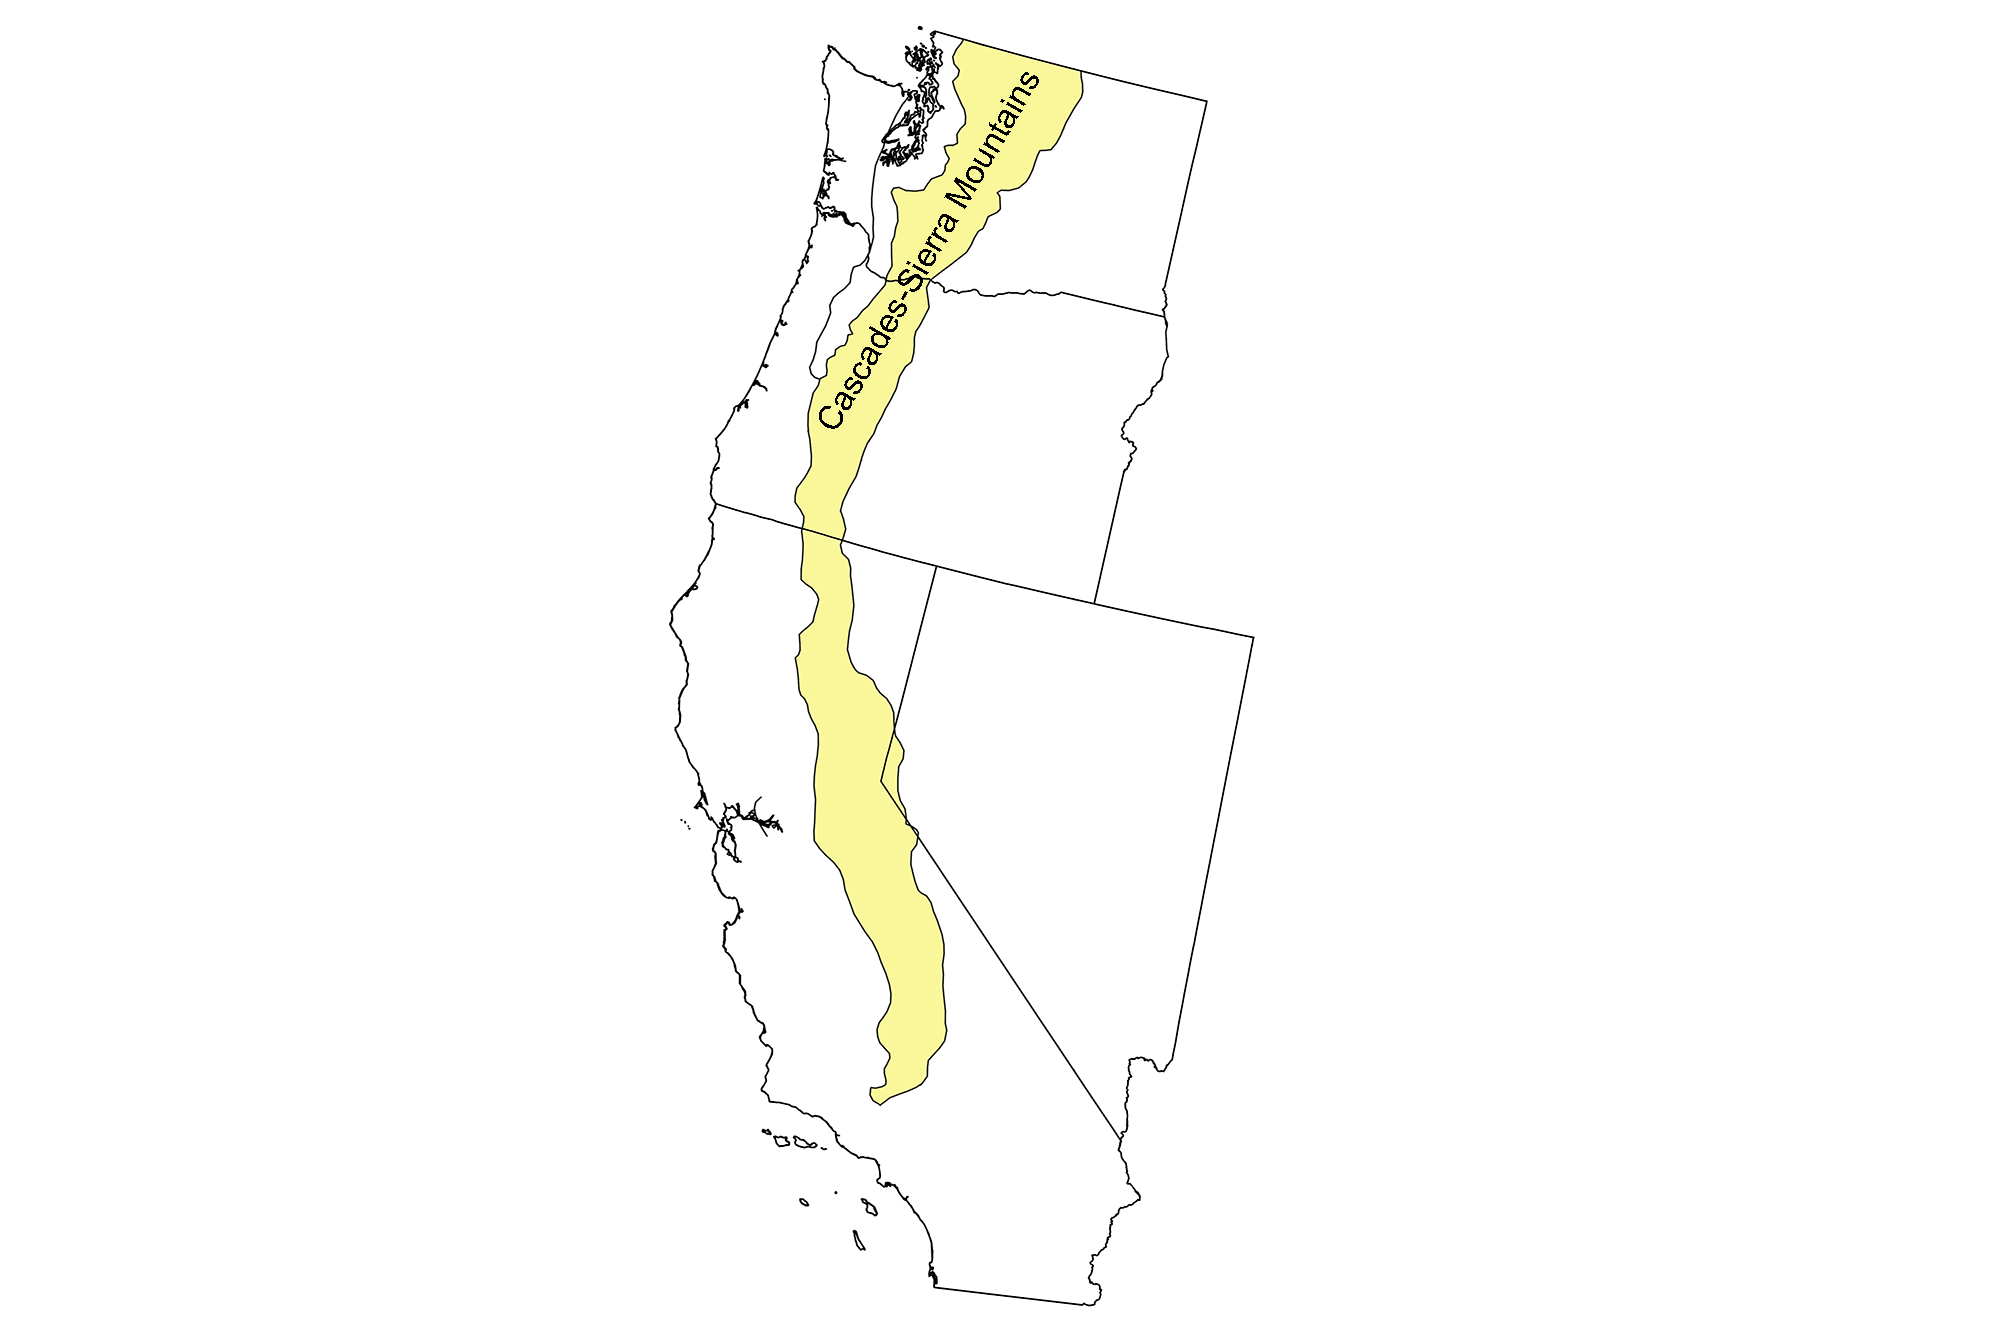 Simple map identifying the Cascade and Sierra Mountains physiographic region of the western United States.